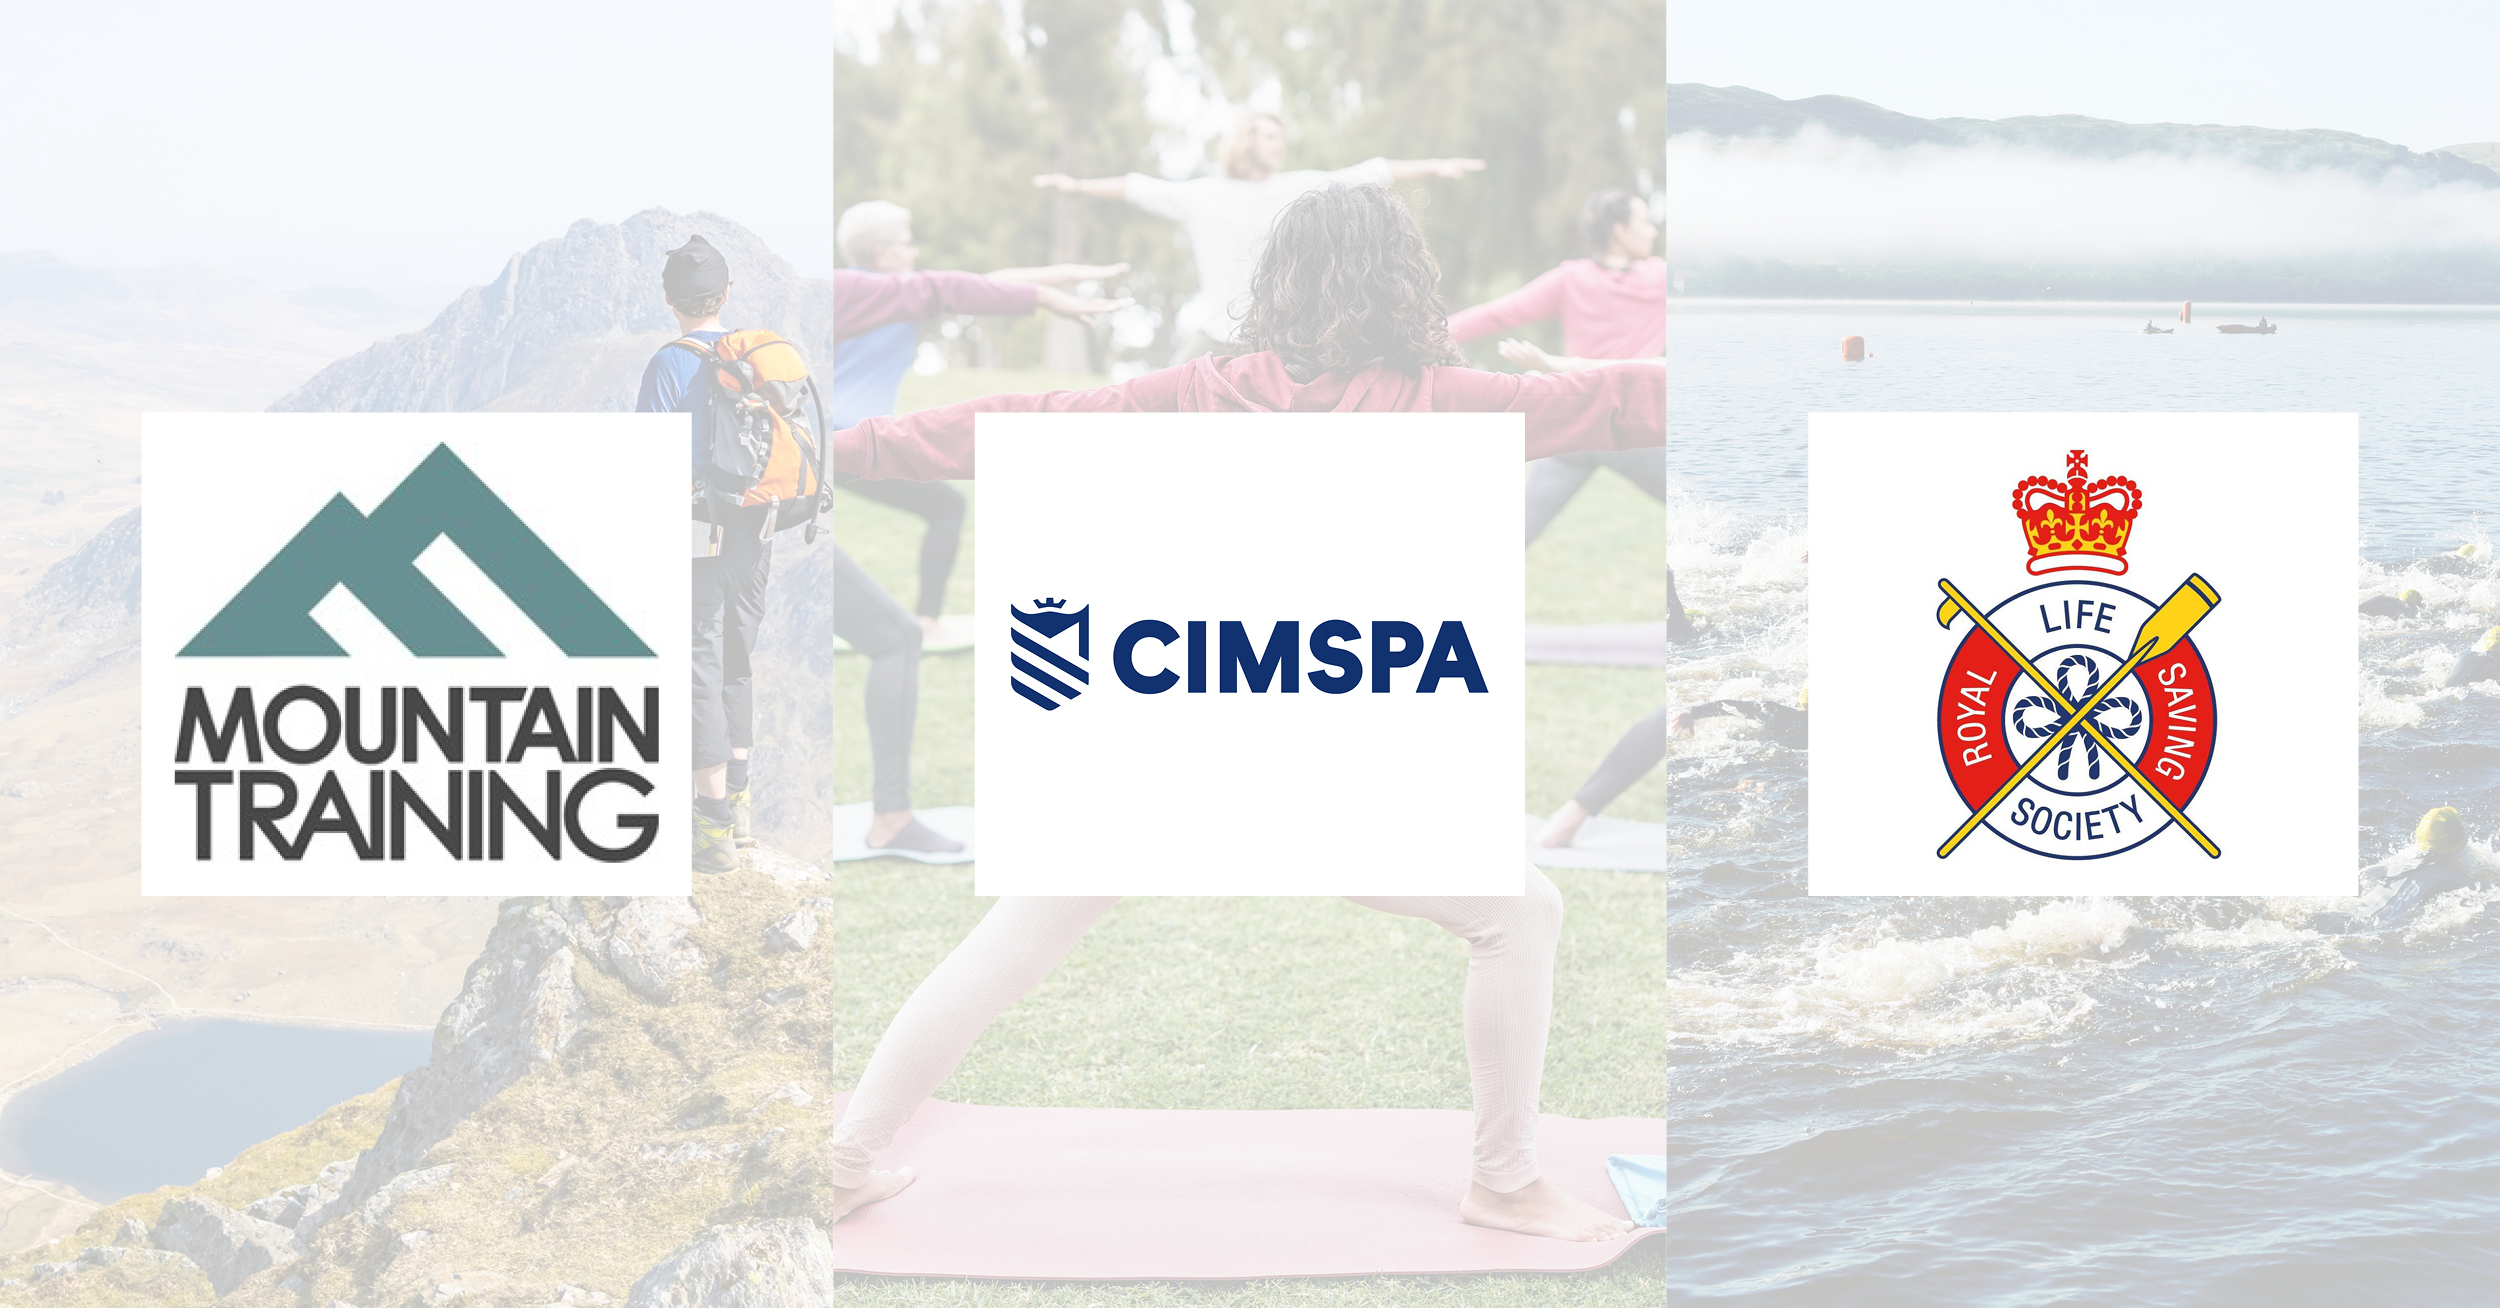 Current users include Mountain Training, The Chartered Institute of Management for Sport and Physical Activity (CIMSPA) and the Royal Life Saving Society UK.